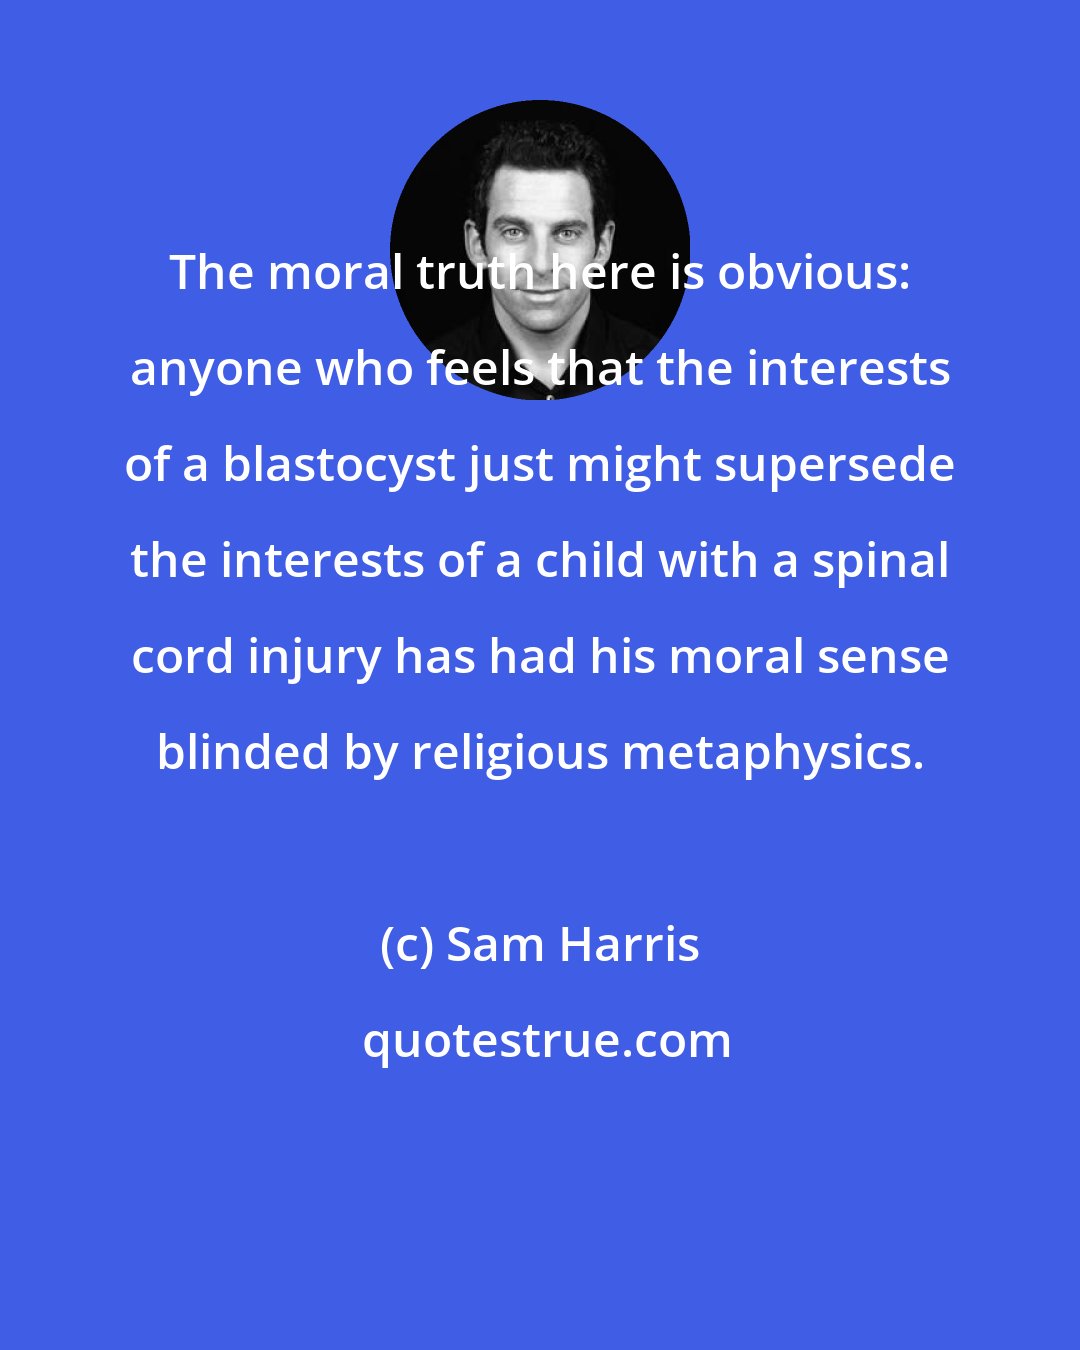 Sam Harris: The moral truth here is obvious: anyone who feels that the interests of a blastocyst just might supersede the interests of a child with a spinal cord injury has had his moral sense blinded by religious metaphysics.